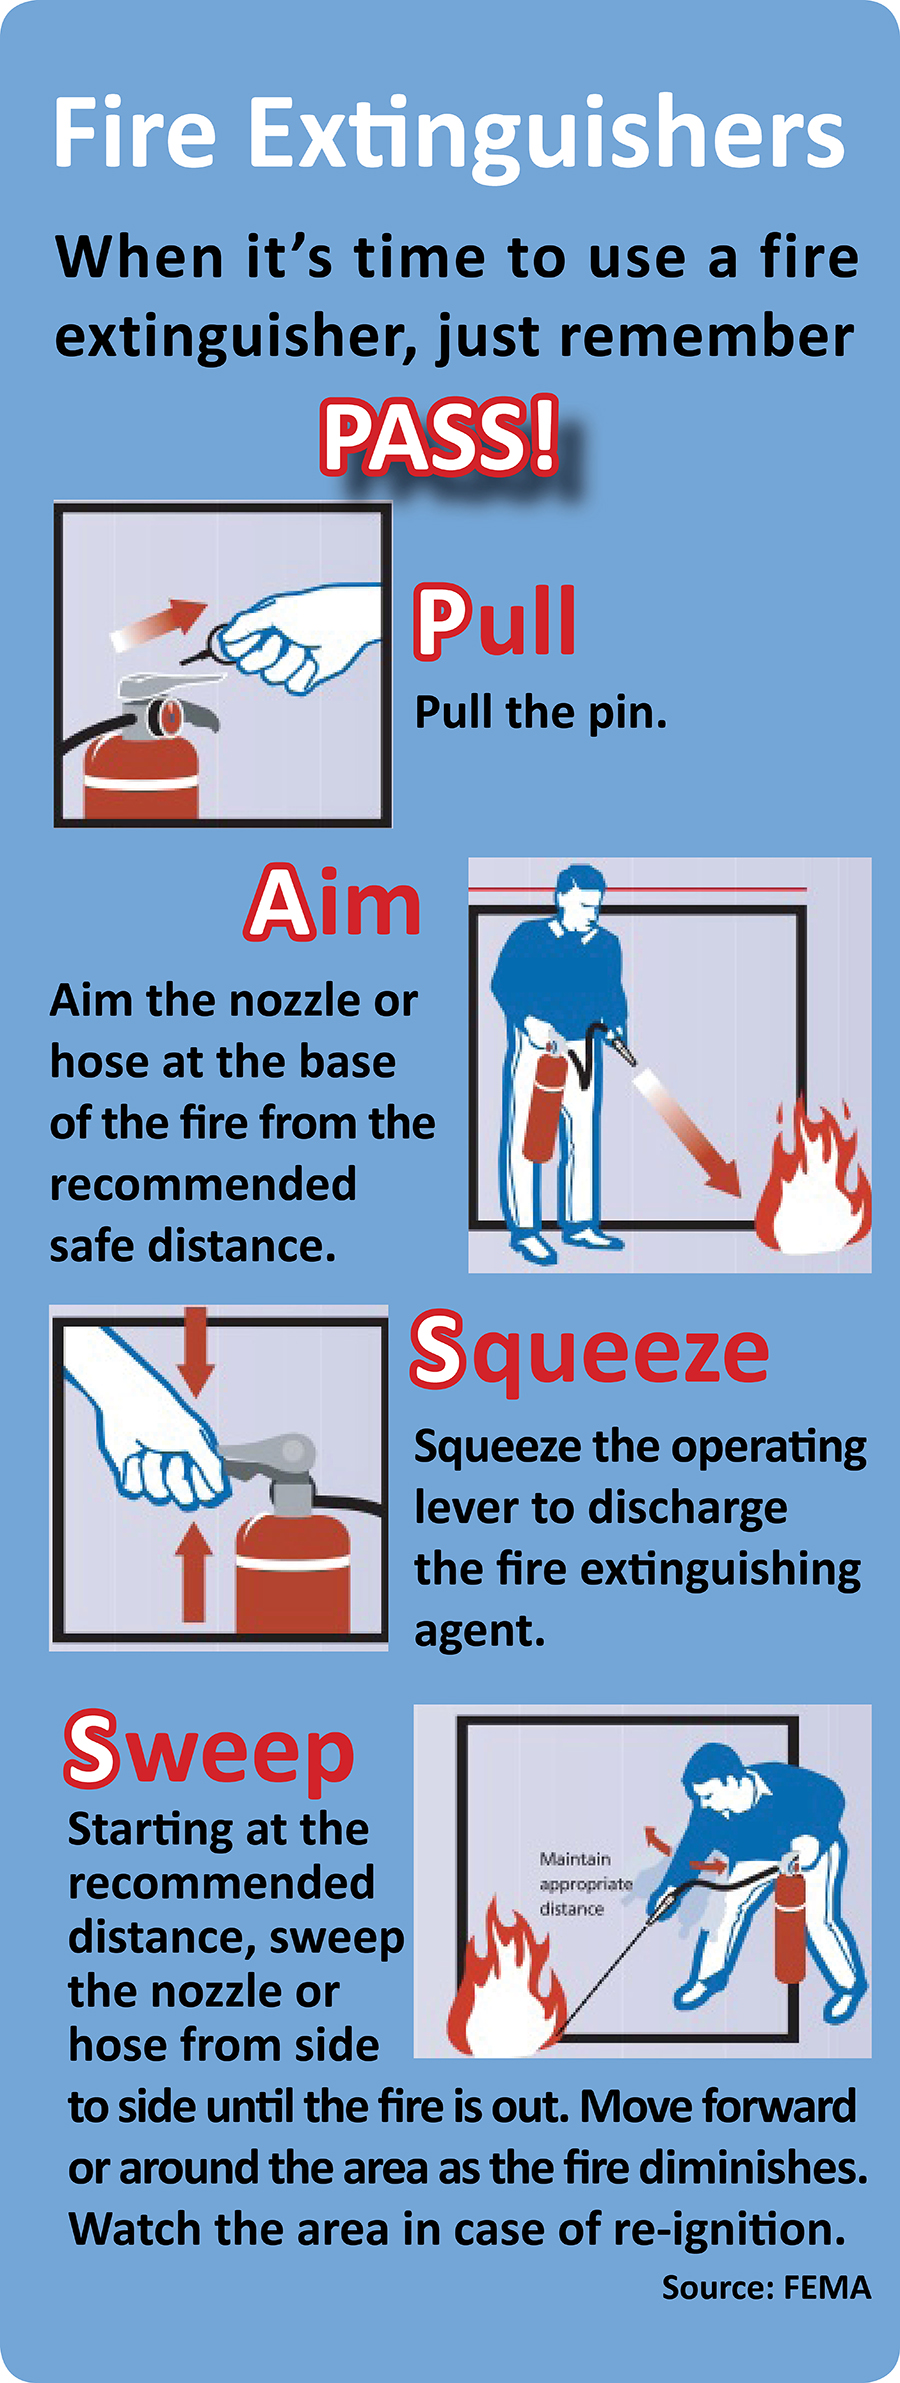 When using a fire extinguisher, remember PASS: pull the pin, aim the nozzle, squeeze the lever and sweep the nozzle from side to side. 